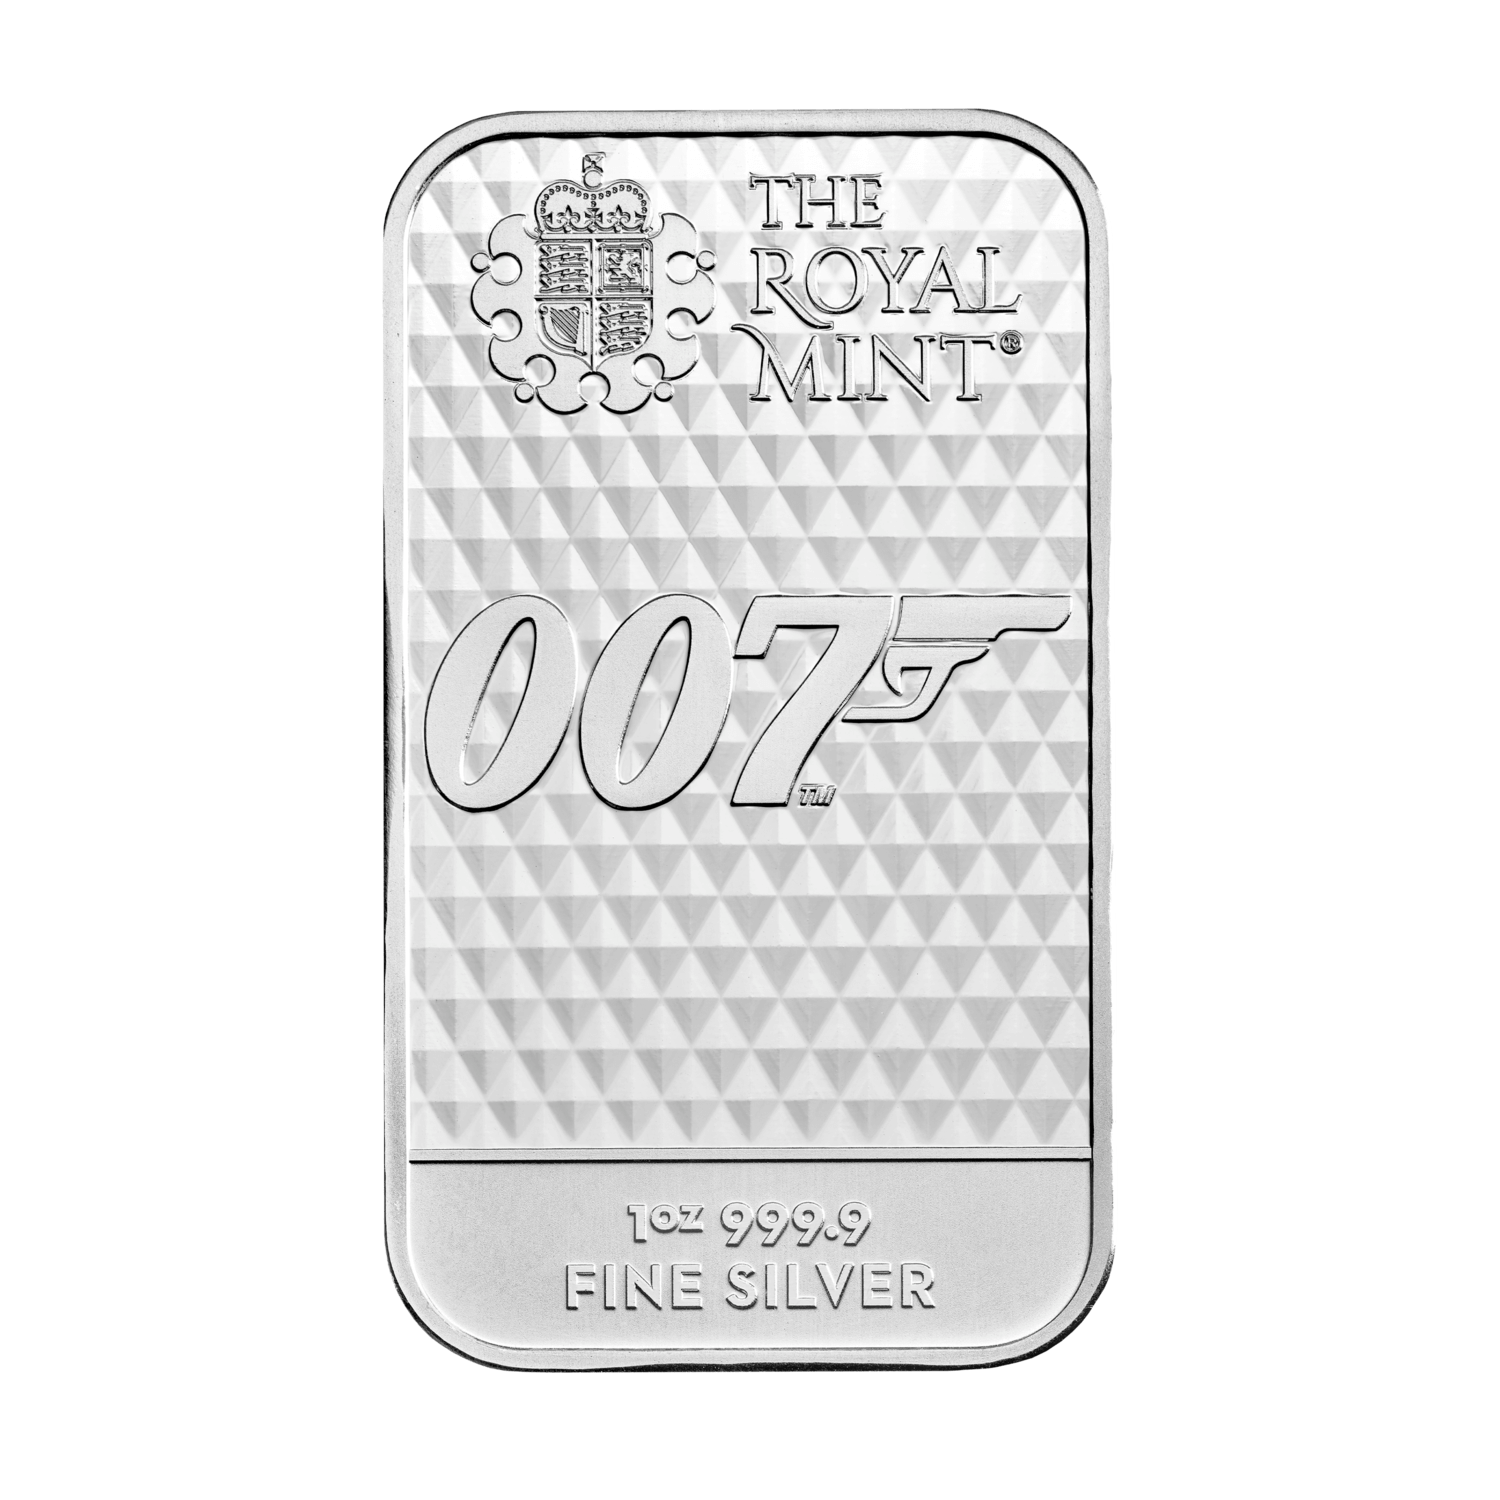 James Bond Diamonds are Forever 1oz Silver Minted Bar